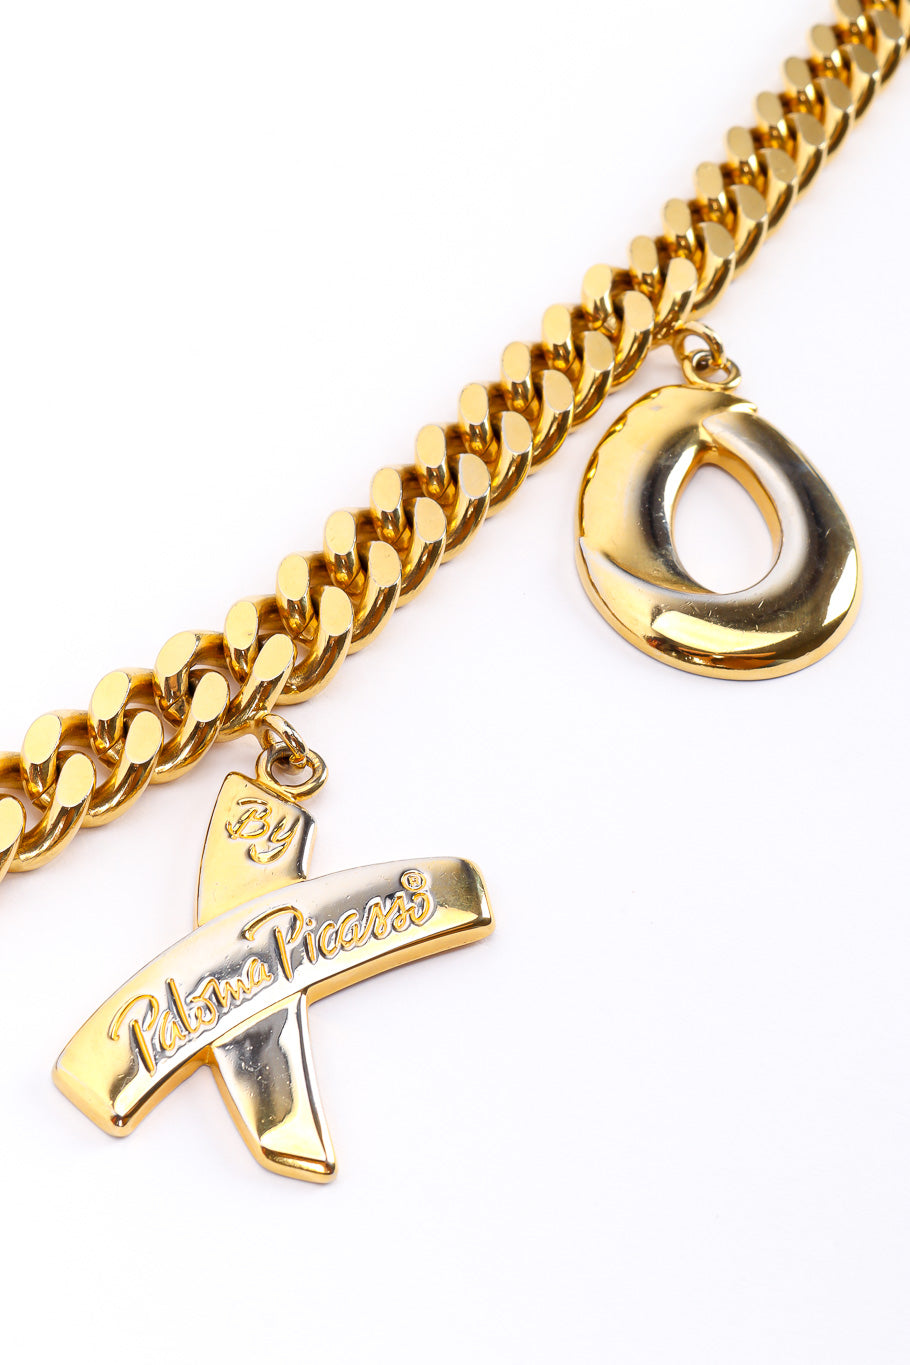 XOXO charm belt by Paloma Picasso on white background X and O charms close @recessla